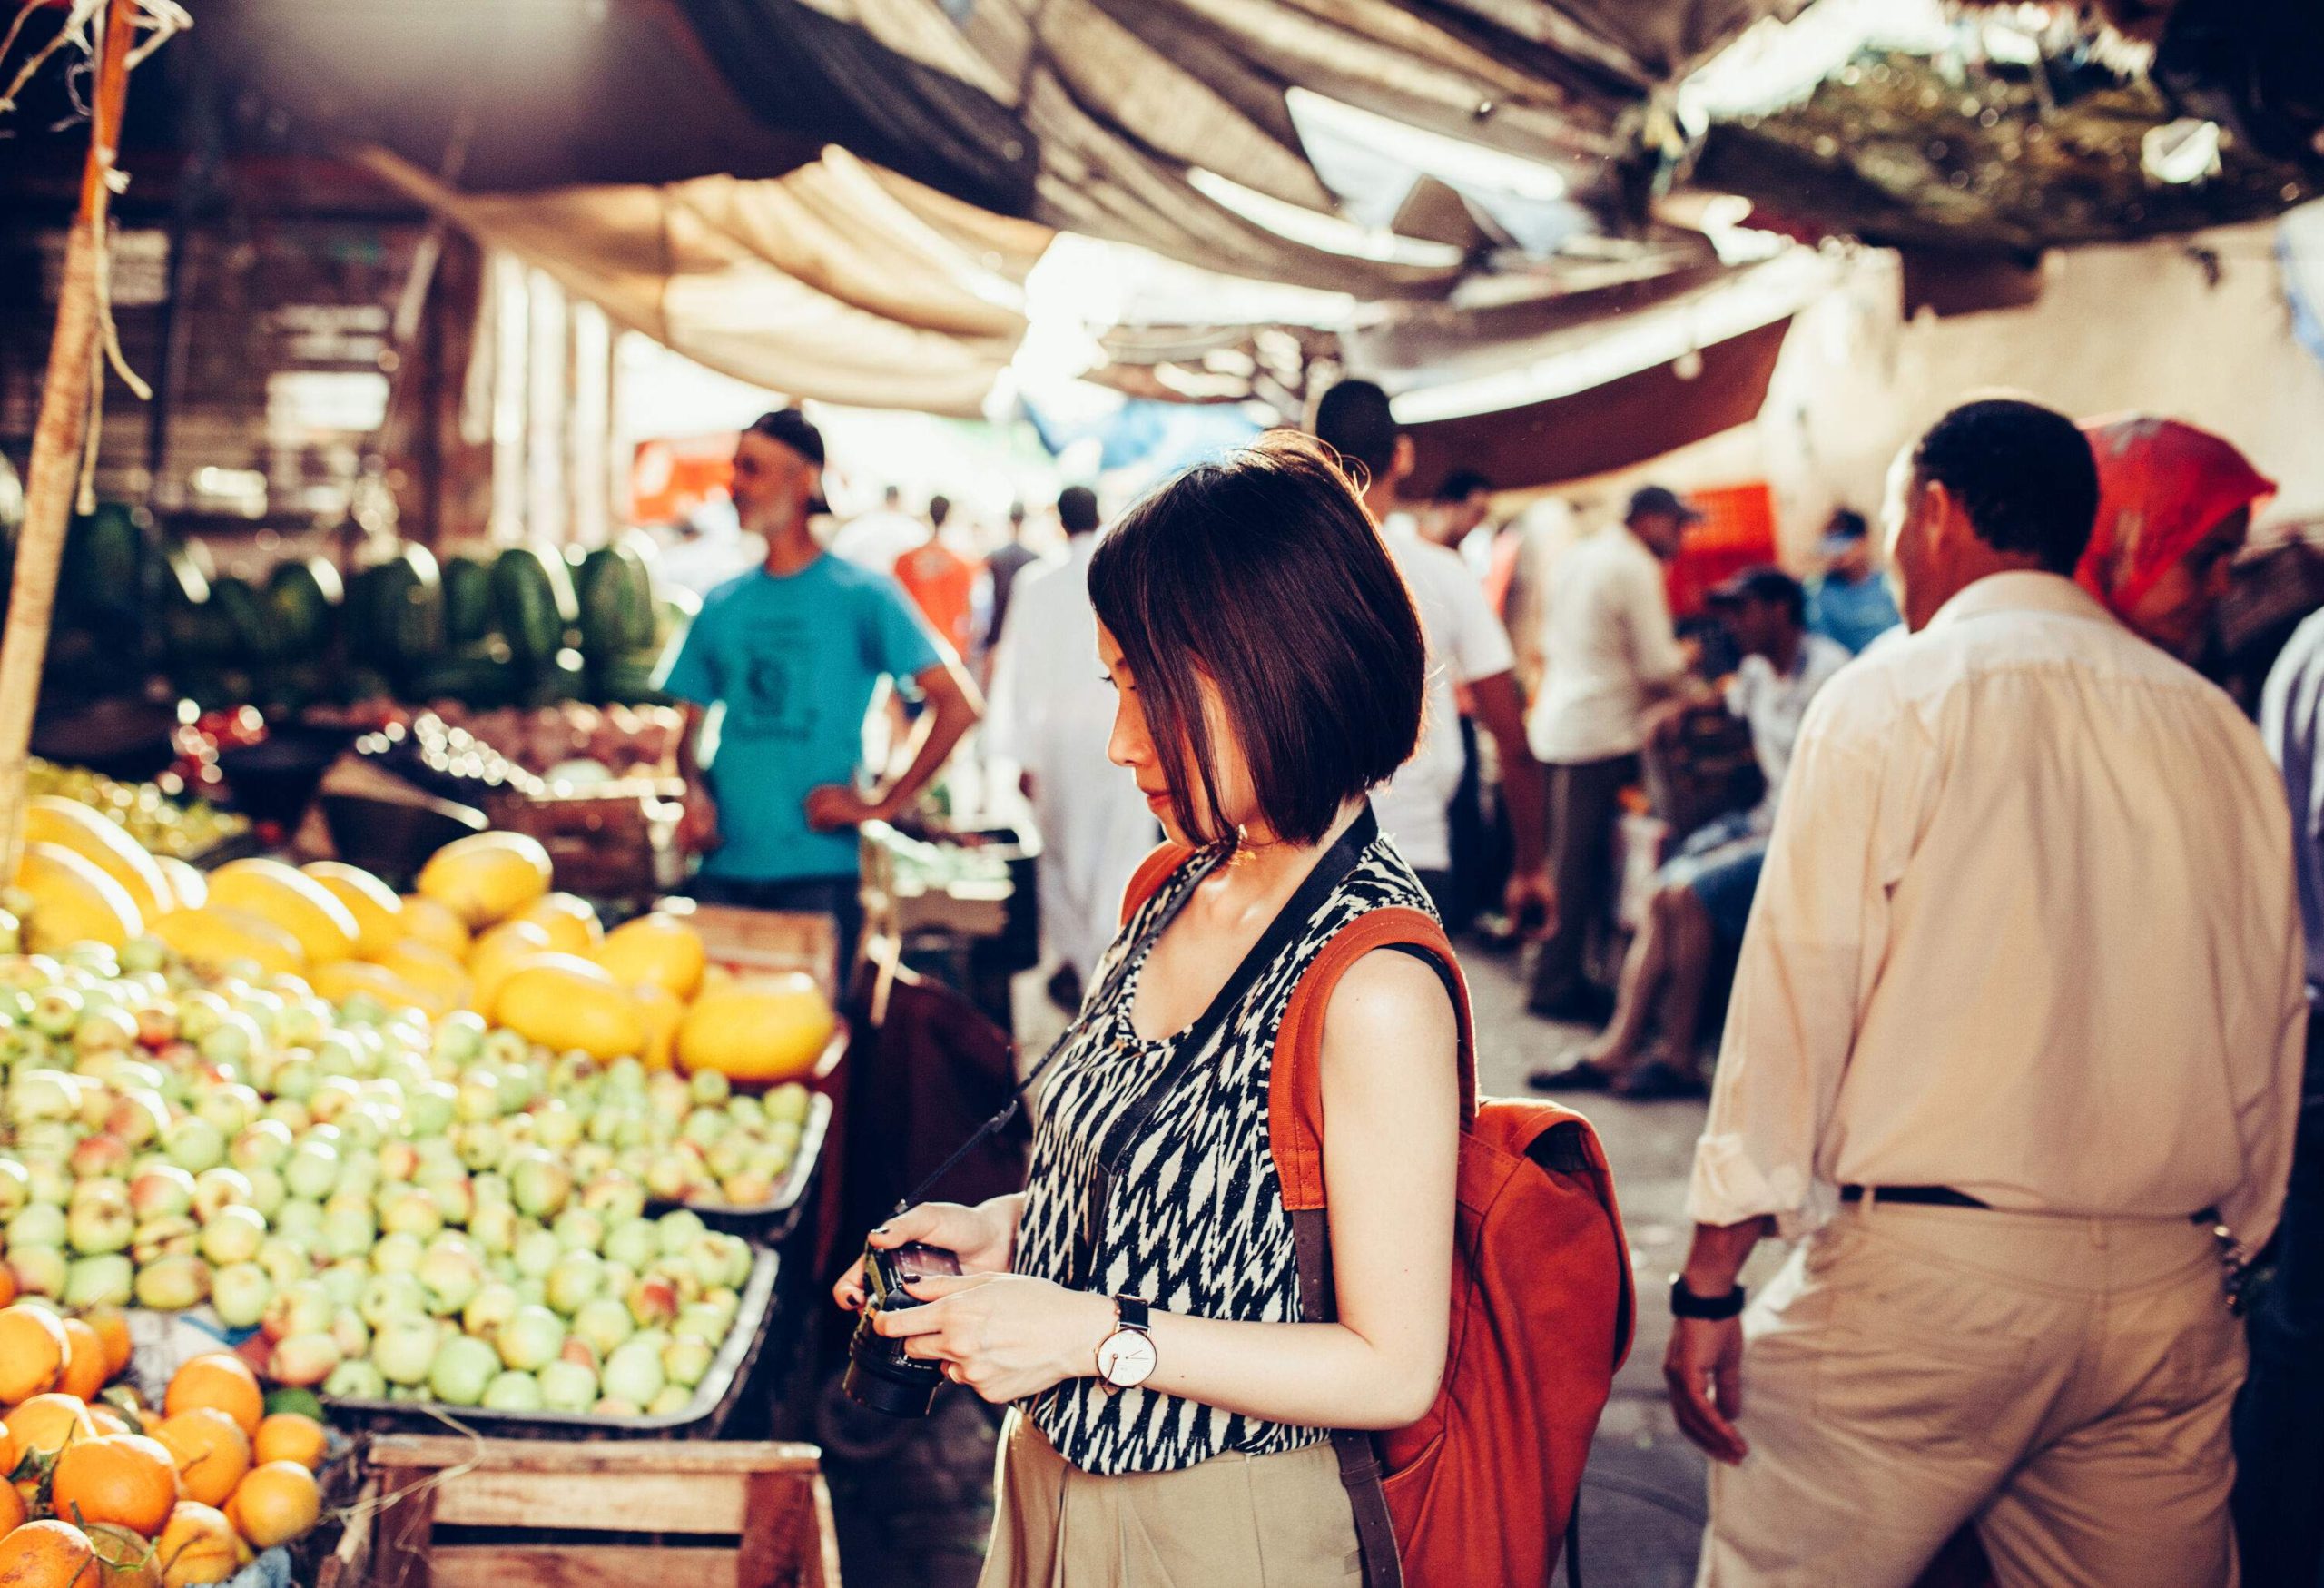 A young tourist holding a digital camera standing in front of a fruit stall.